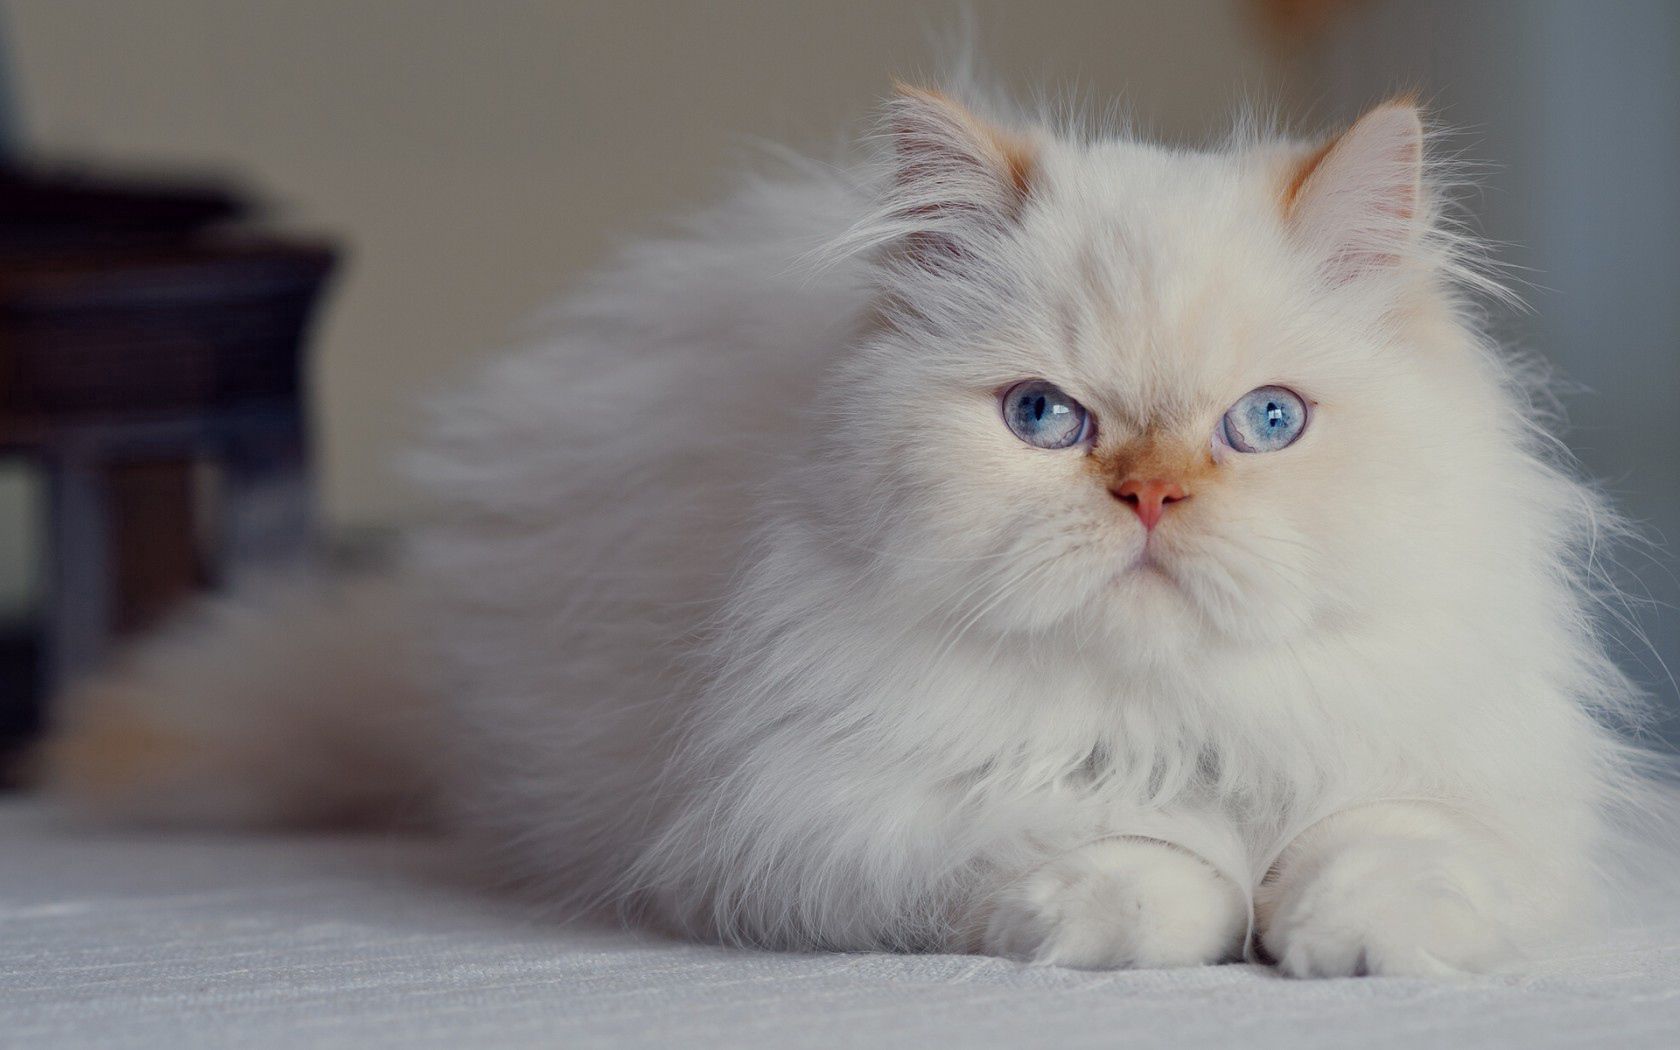 animals, cat, fluffy, persian, blue eyed High Definition image